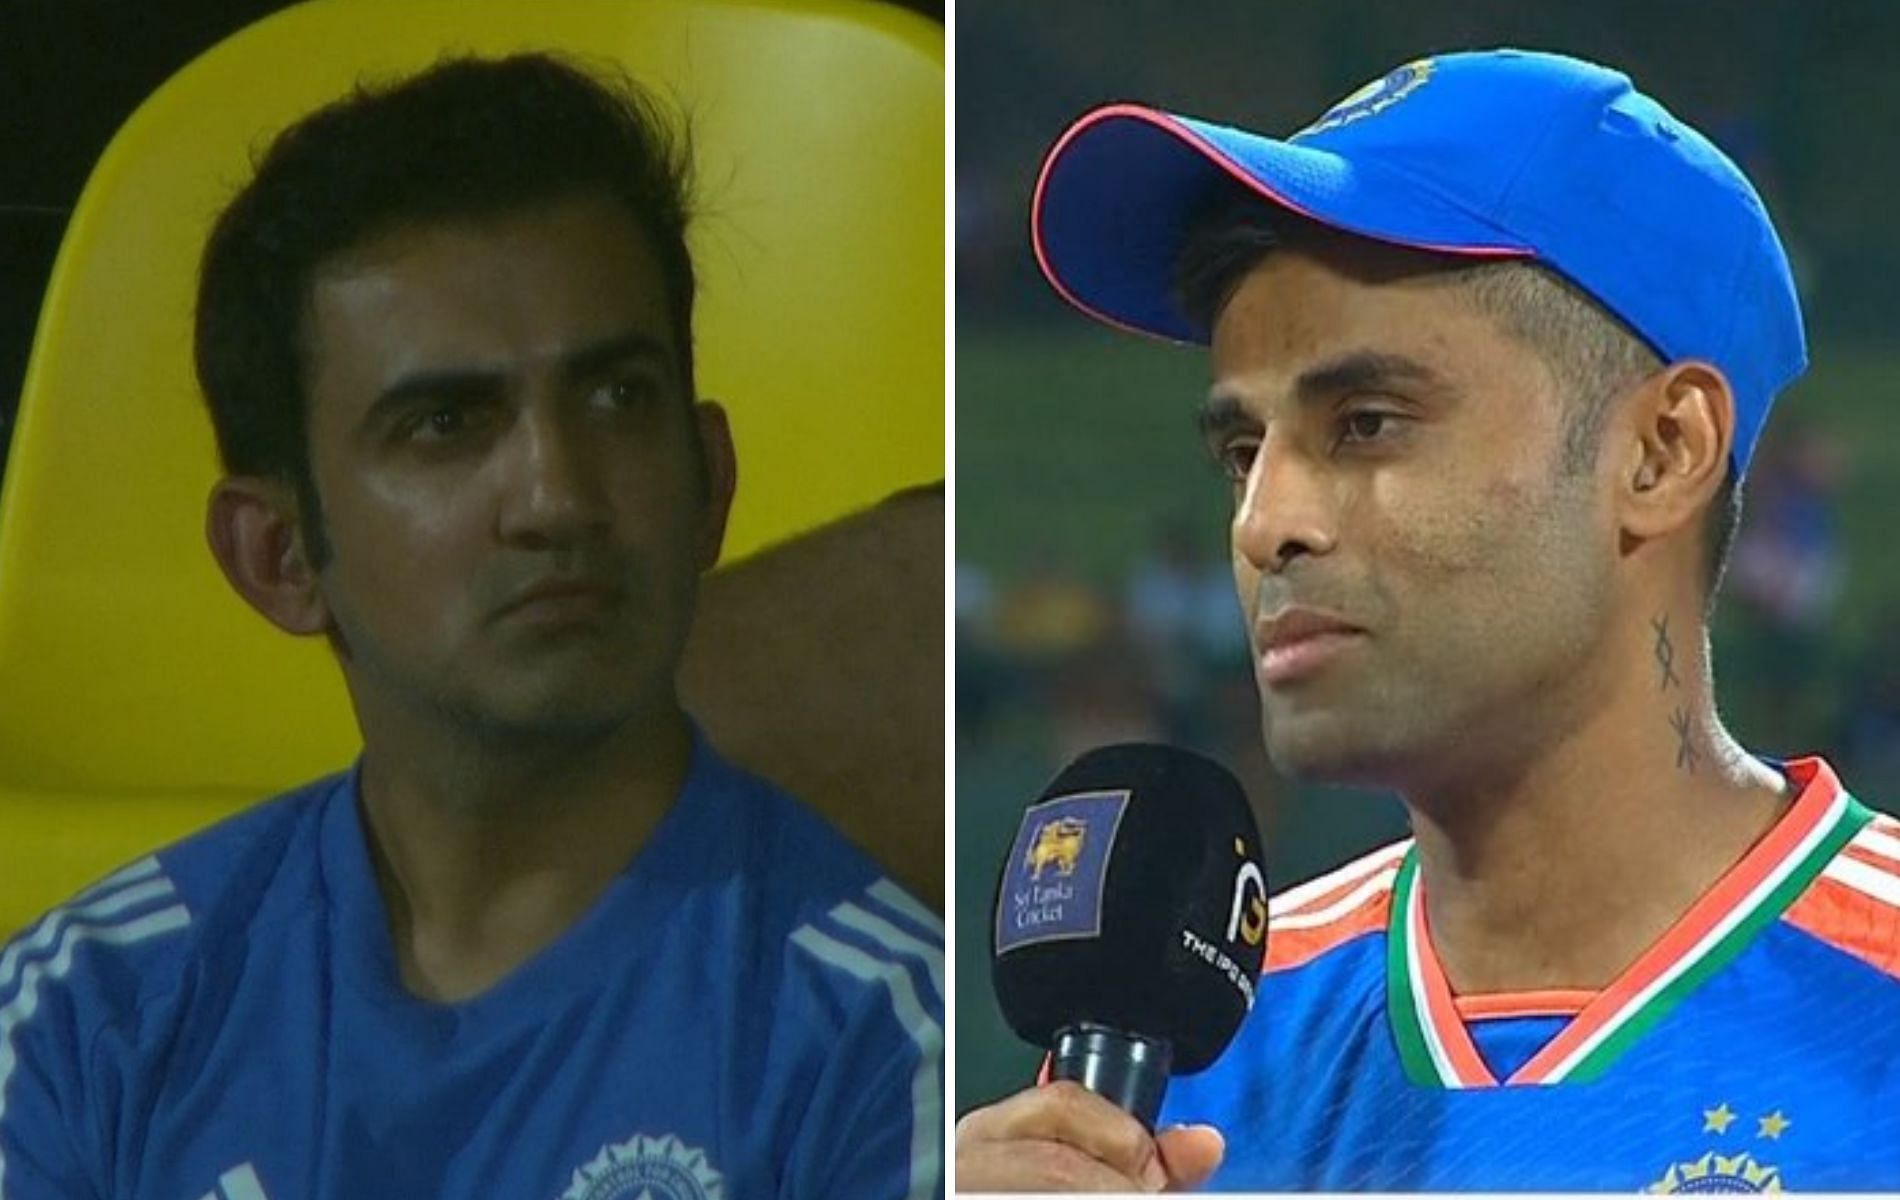 [Watch] Gautam Gambhir engages in a lengthy chat with Suryakumar Yadav after IND vs SL 2nd T20I